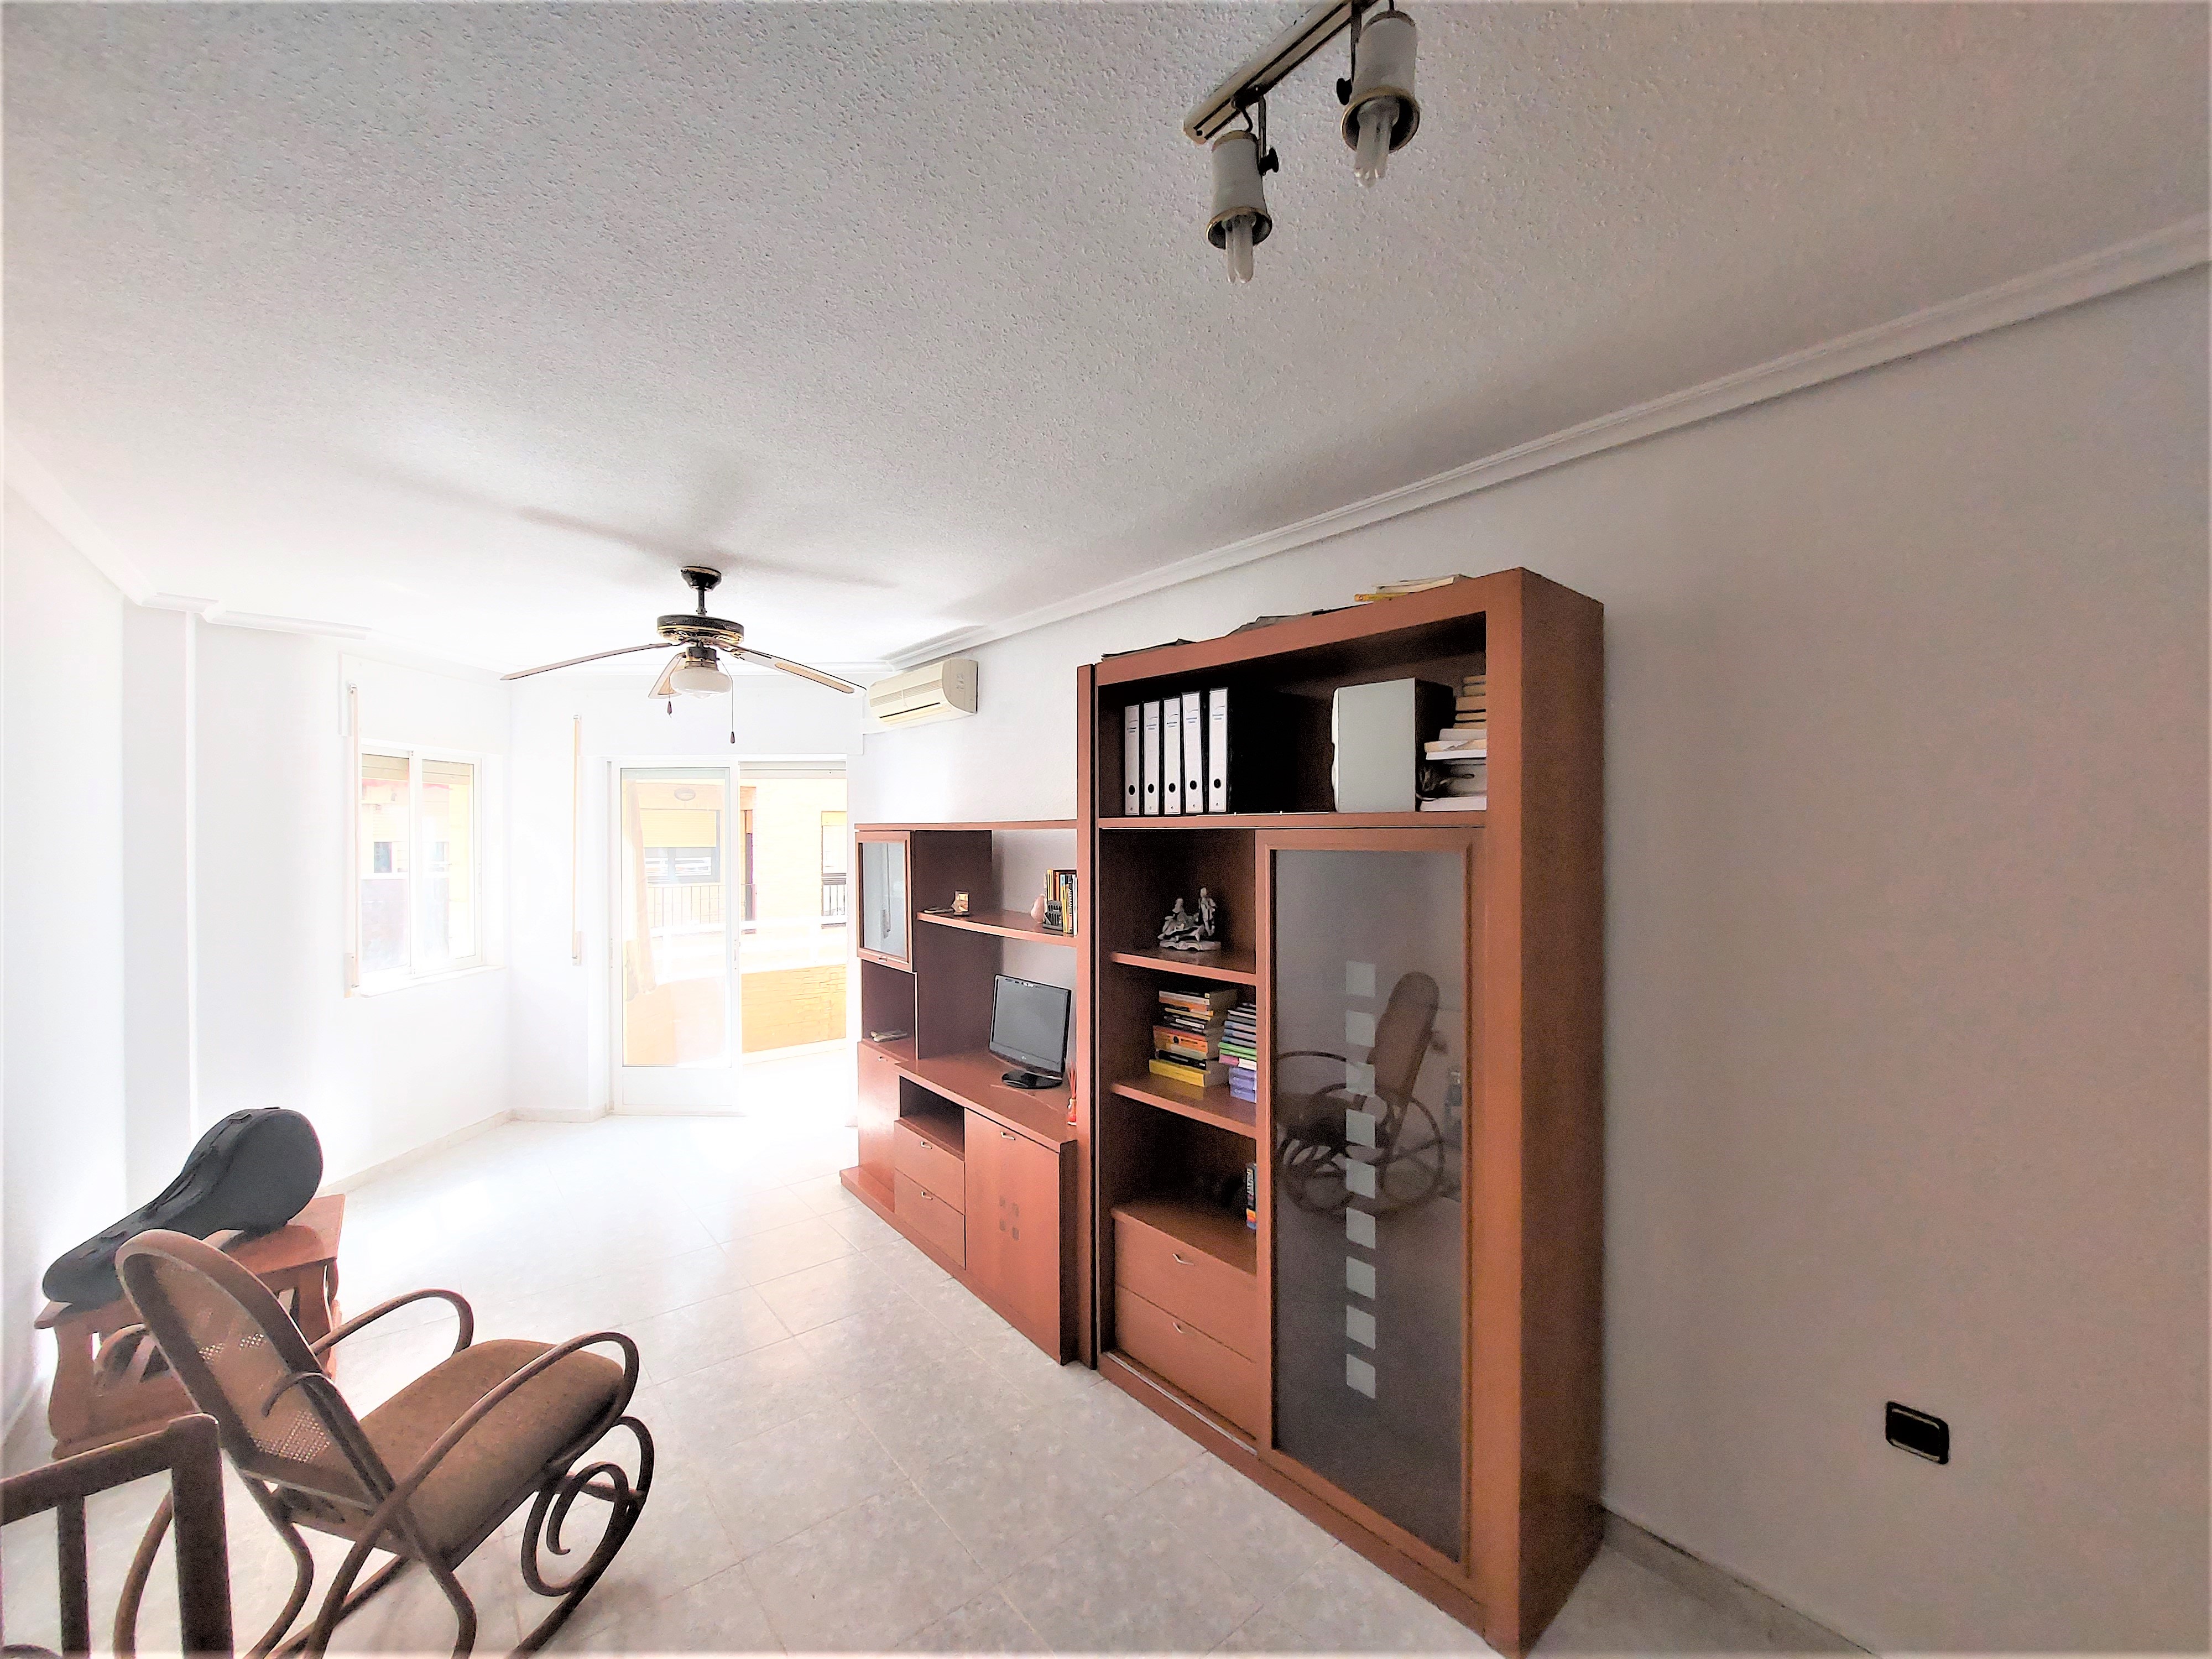 Property Image 495554-torrevieja-apartment-3-2